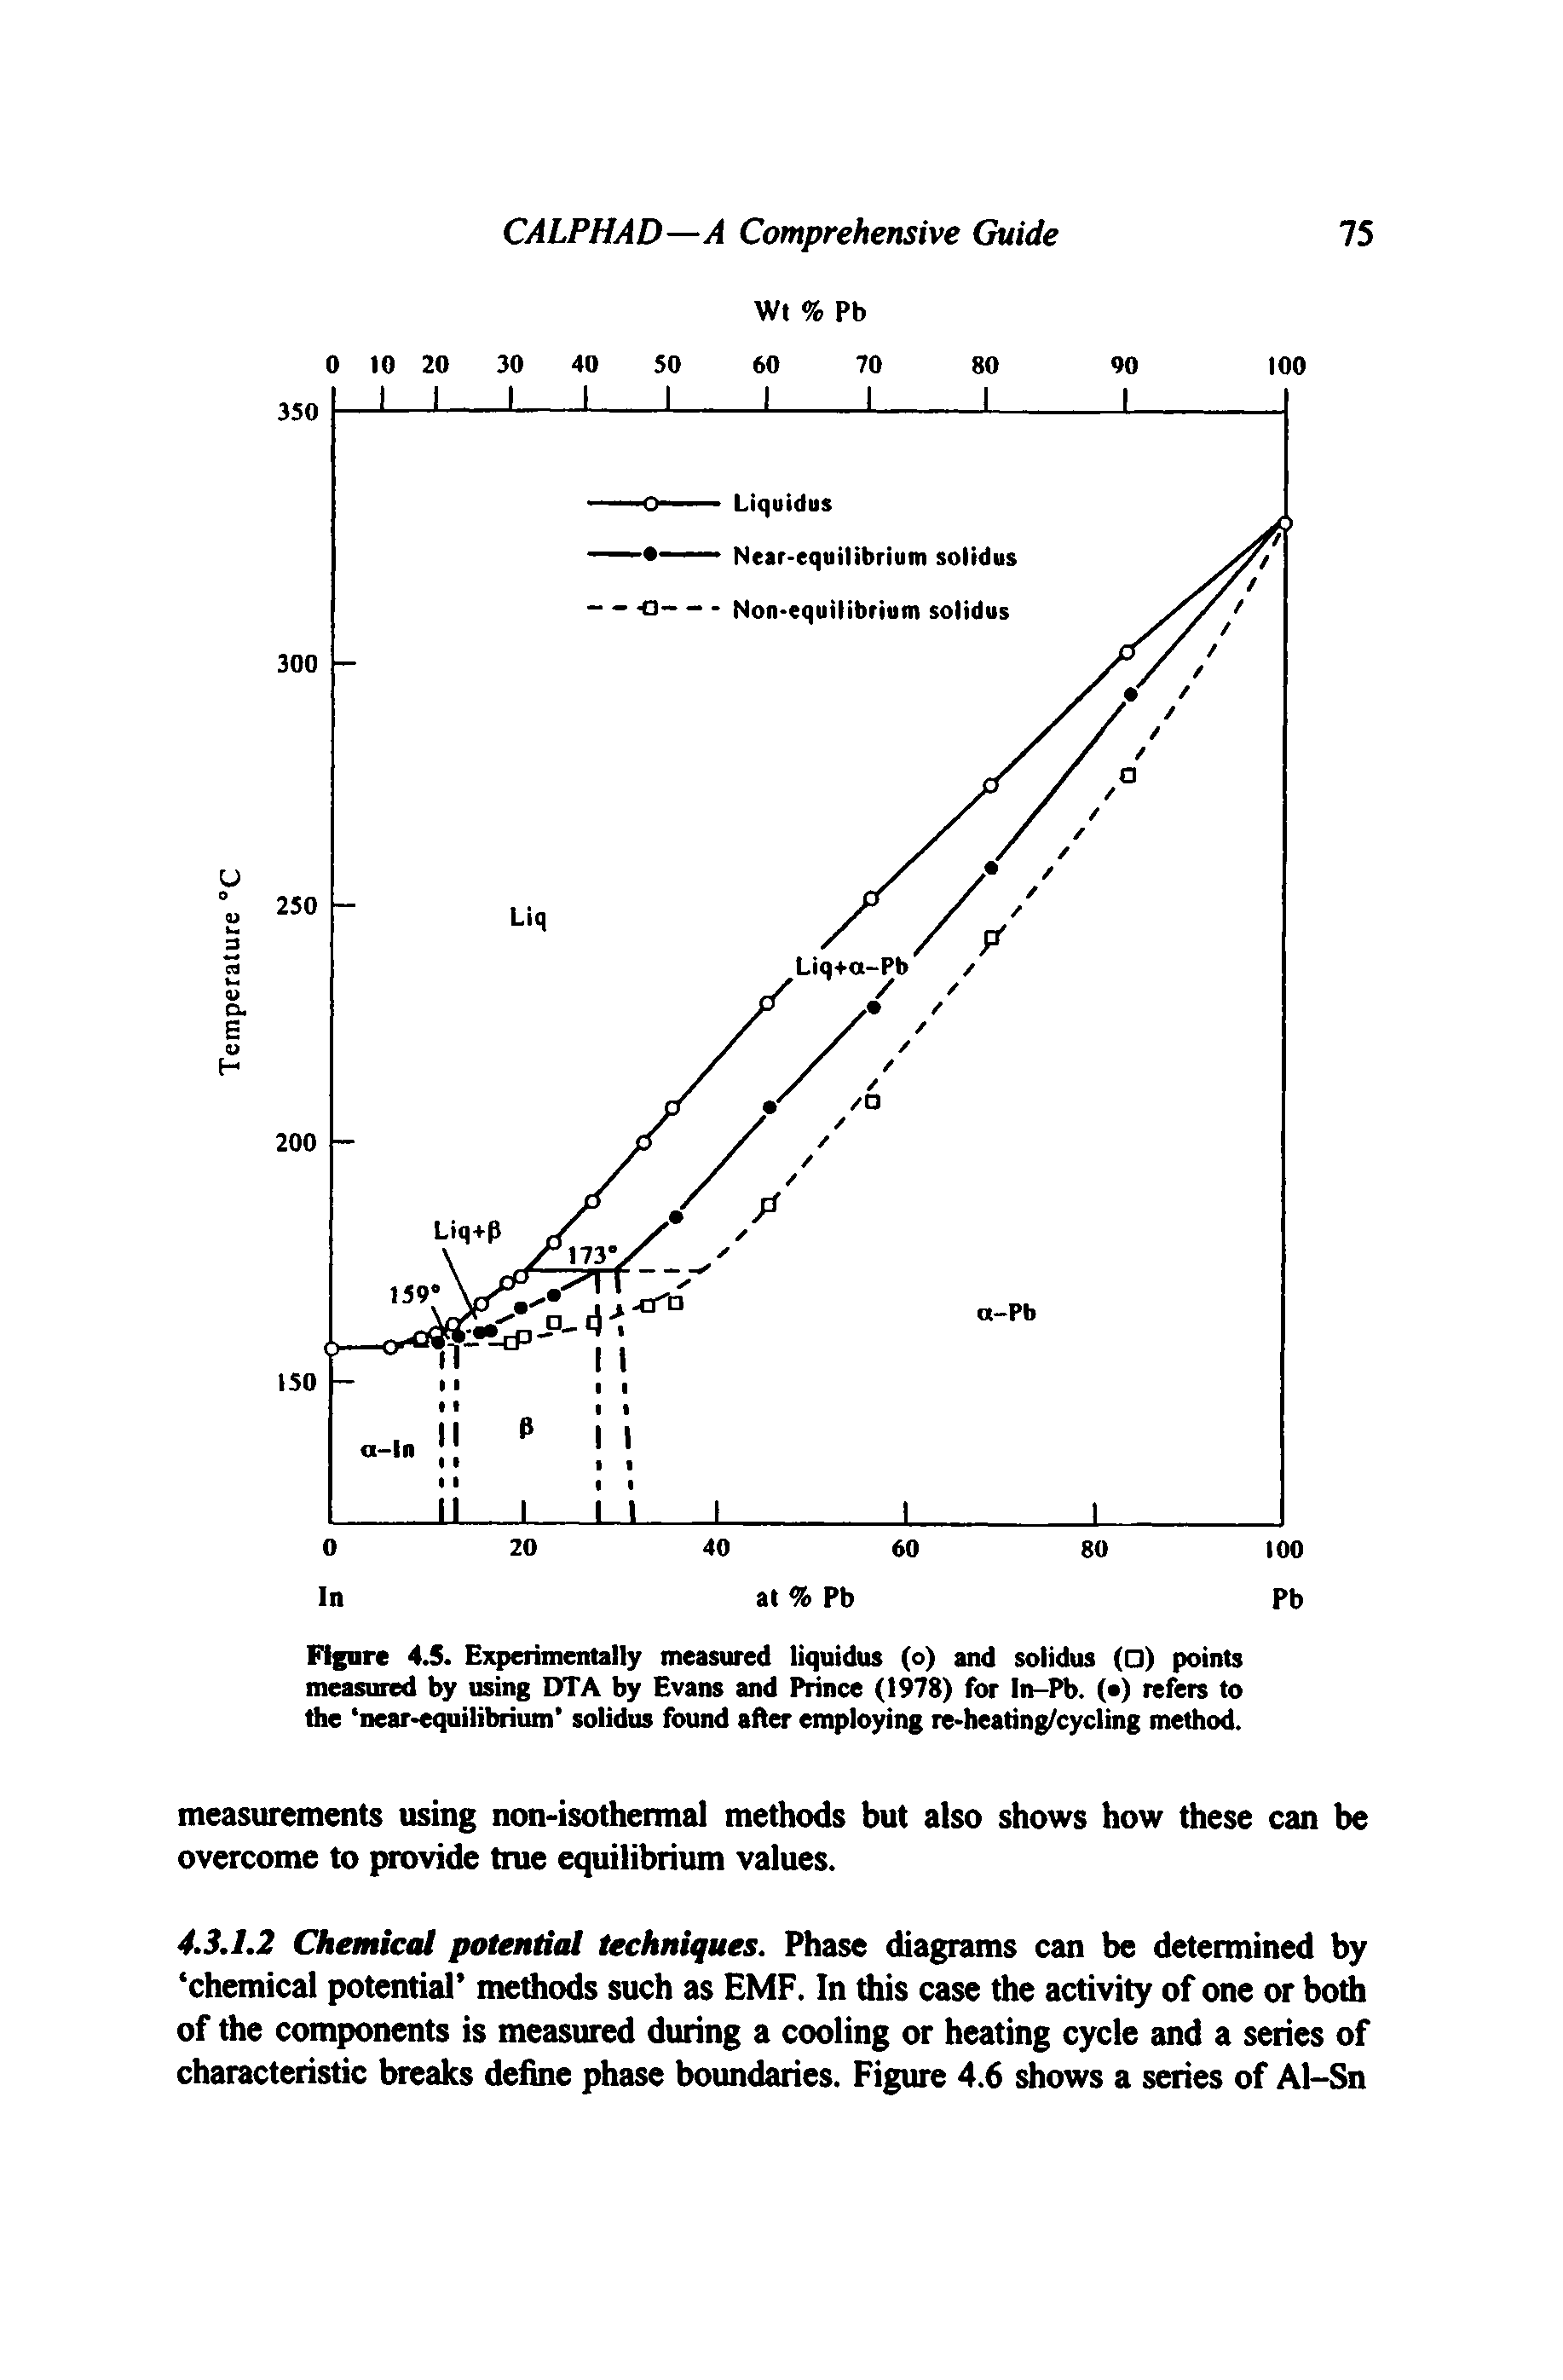 Figure 4.5. Experimentally measured liquidus (o) and solidus ( ) points measured by using DTA by Evans and Prince (1978) for In-Pb. ( ) refers to the near-equilibrium solidus found after employing re-heating/cycling method.